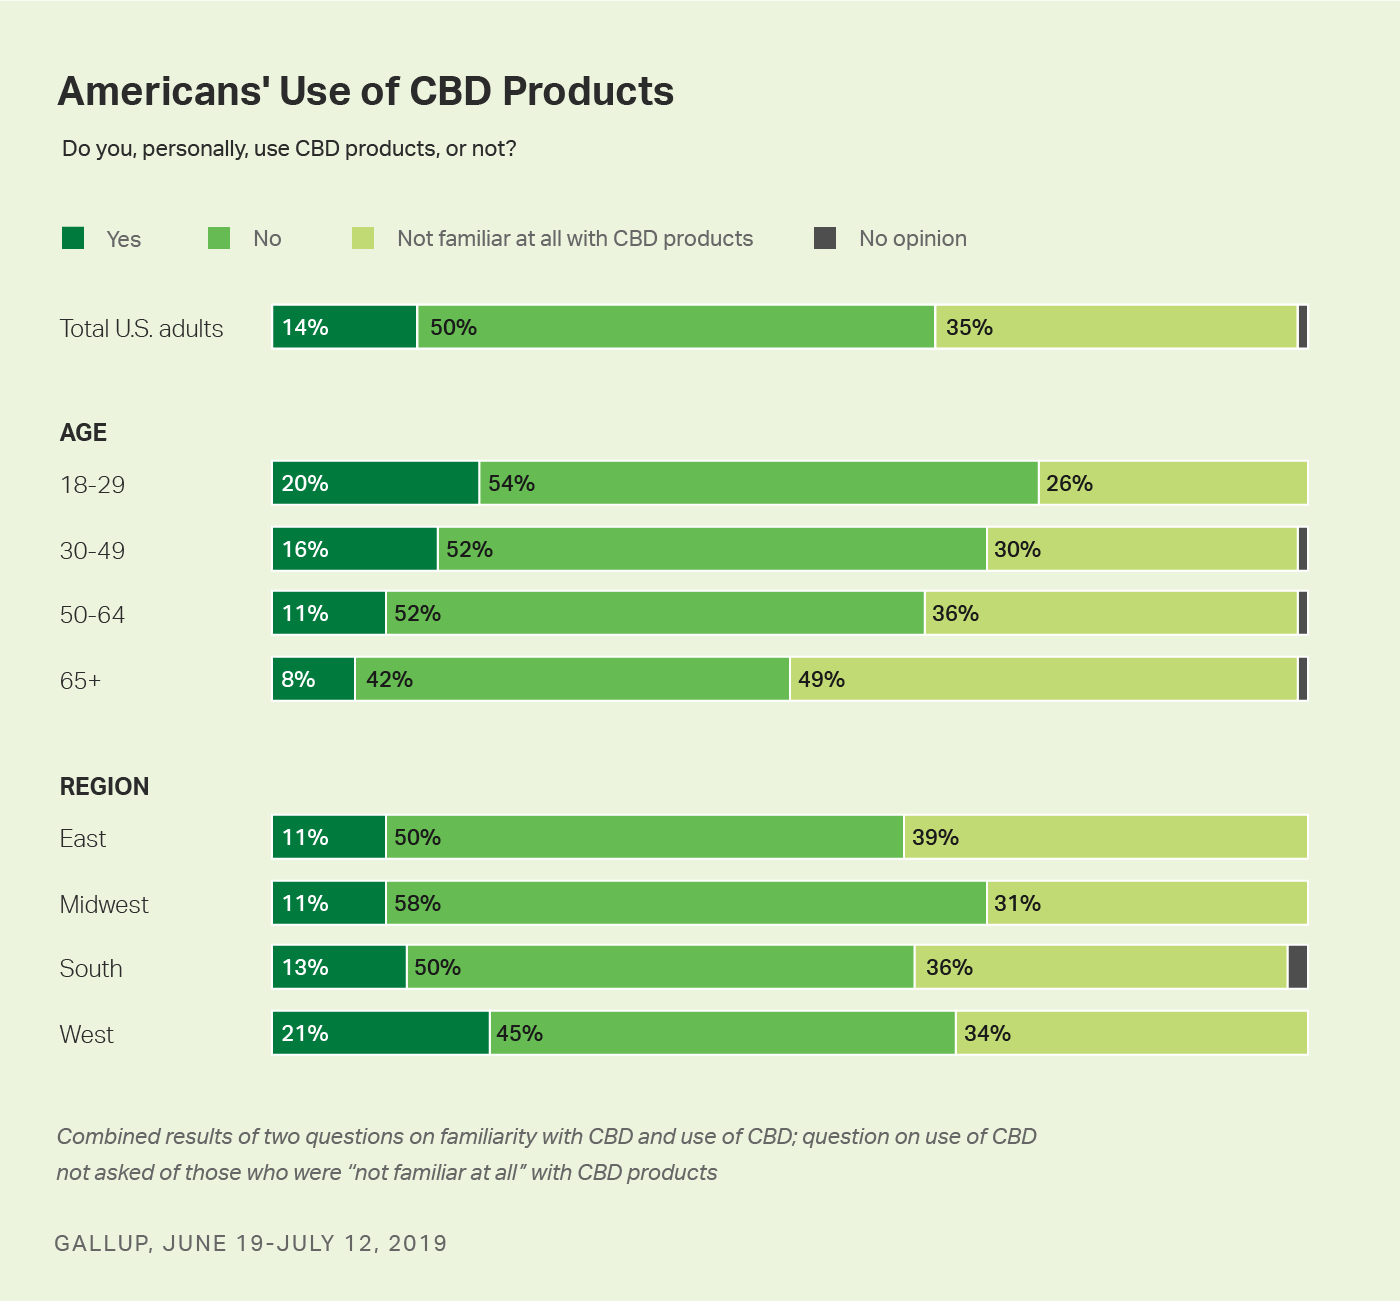 Bar charts. Self-reported use of CBD-based products among all adults, broken down by age group and regional area.